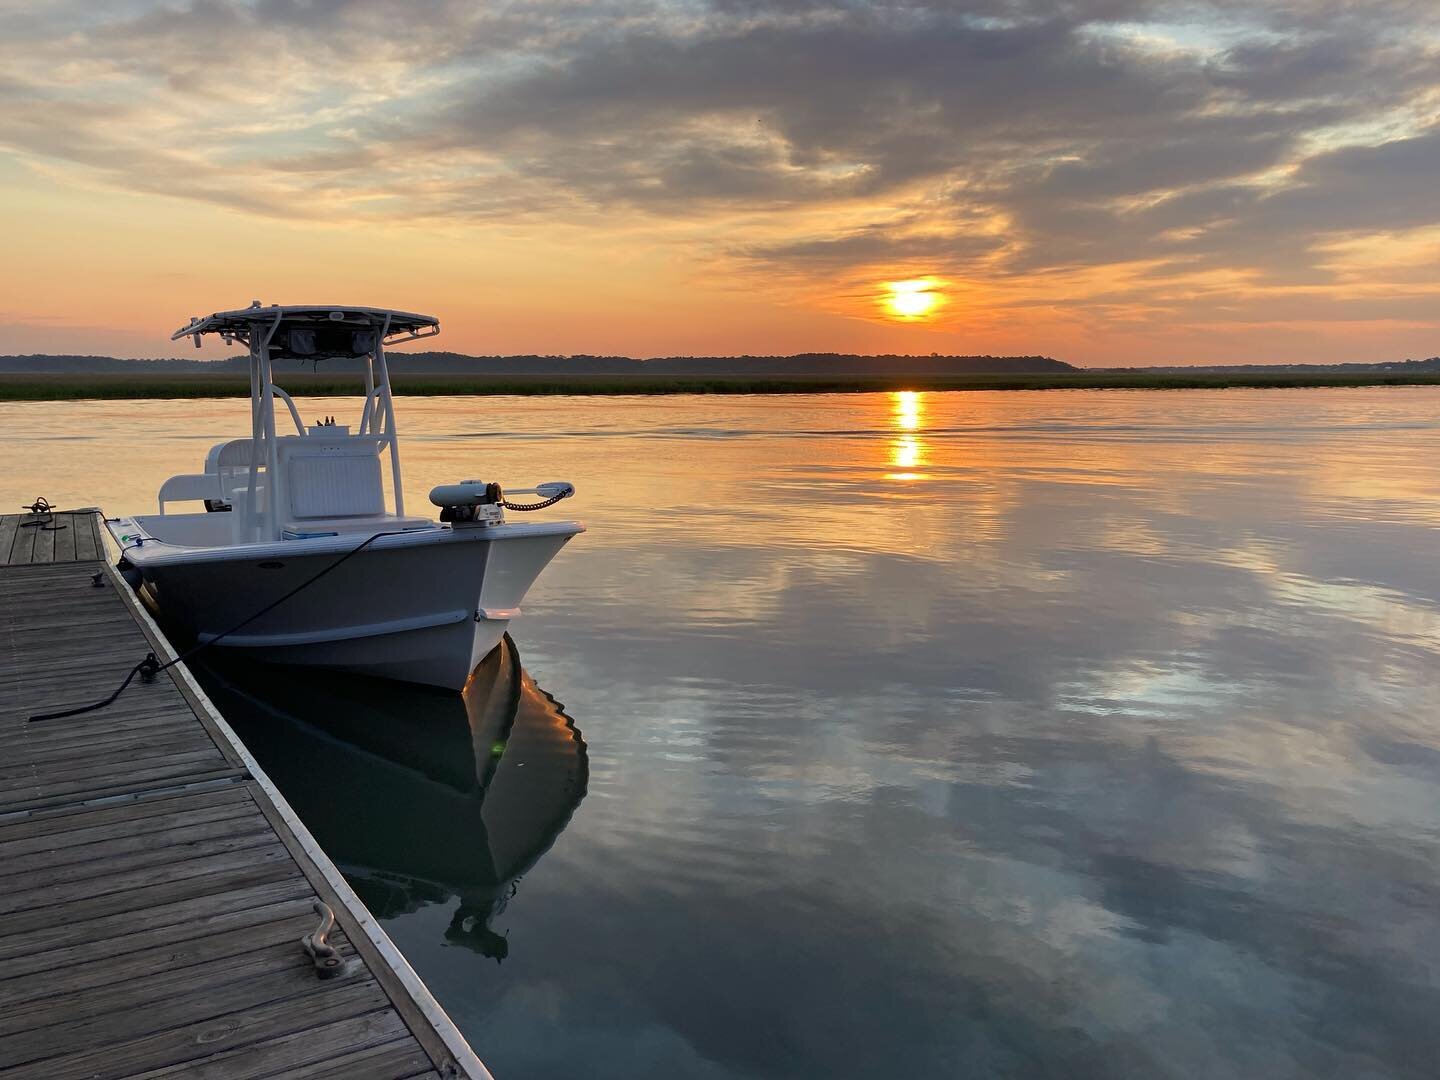 #riseandshine! Hope everyone had a great and safe 4th of July! It&rsquo;s a beautiful day, time to get to work. #sunrise #hansonboats @hansonboats #edisto #edistobeach #lowcountry #southcarolina #fishsc #fishthecarolinas #edistofishing #fishingedisto